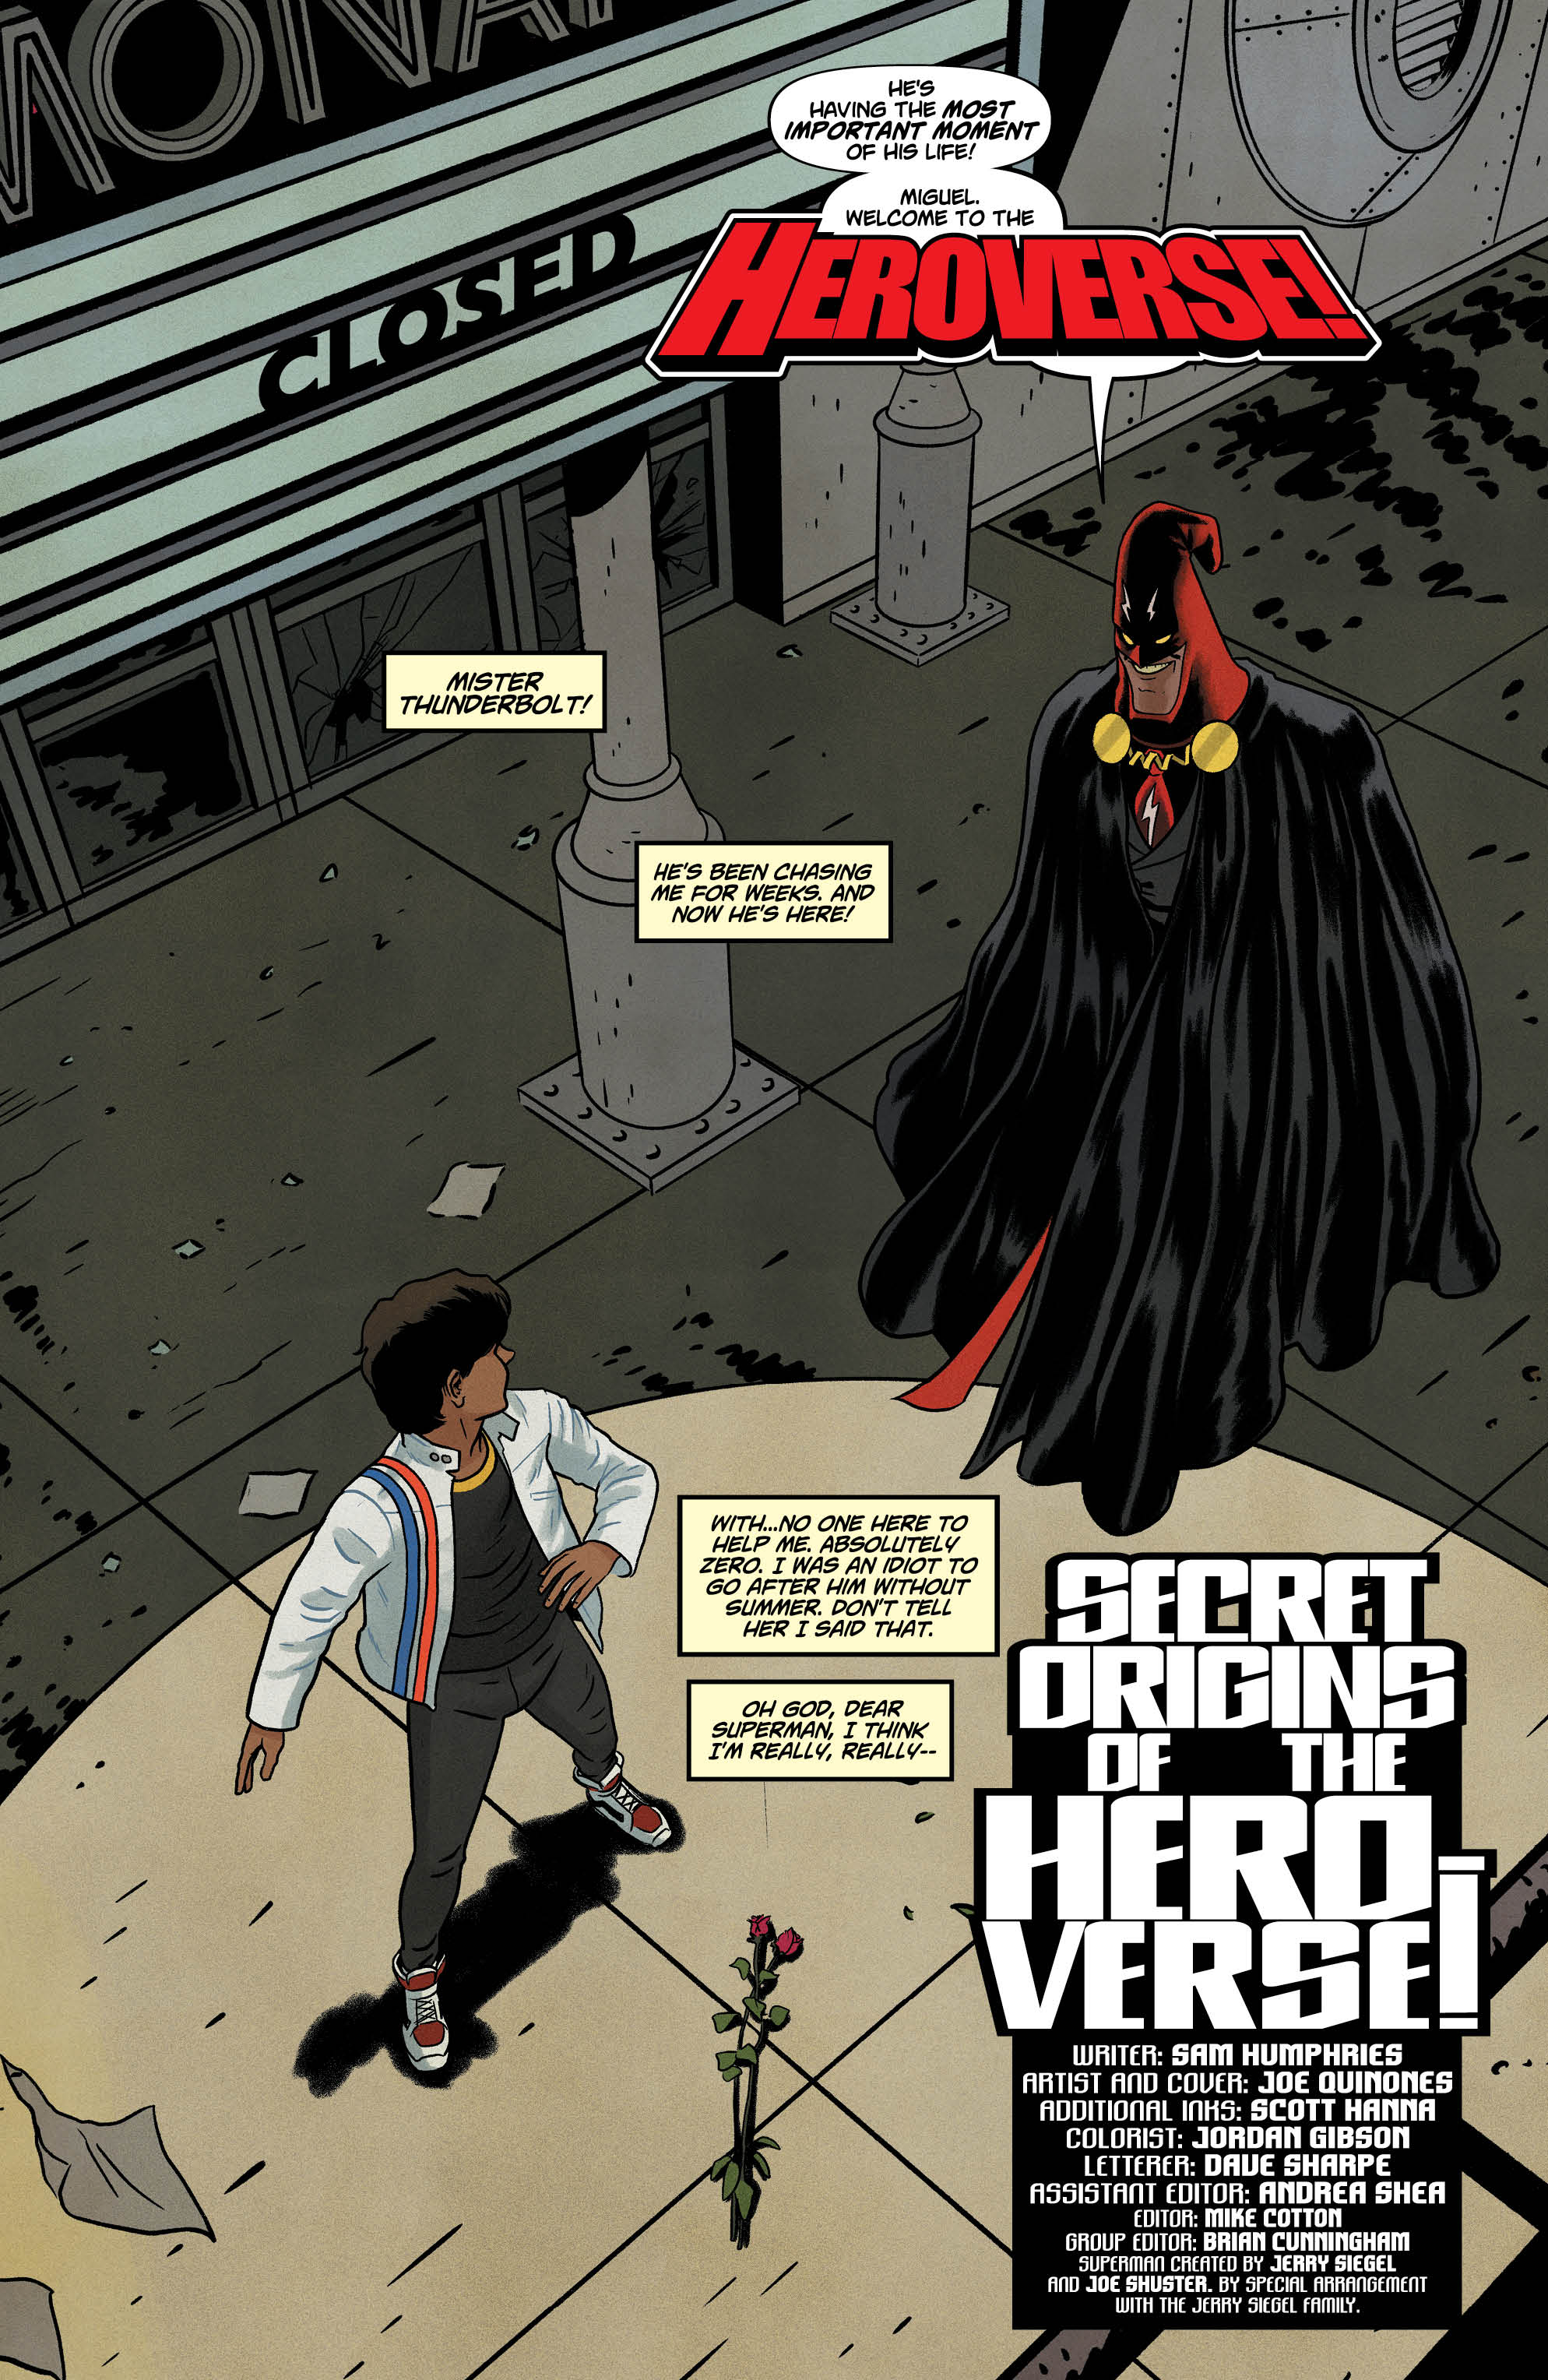 Dial H For Hero #5 Exclusive Preview